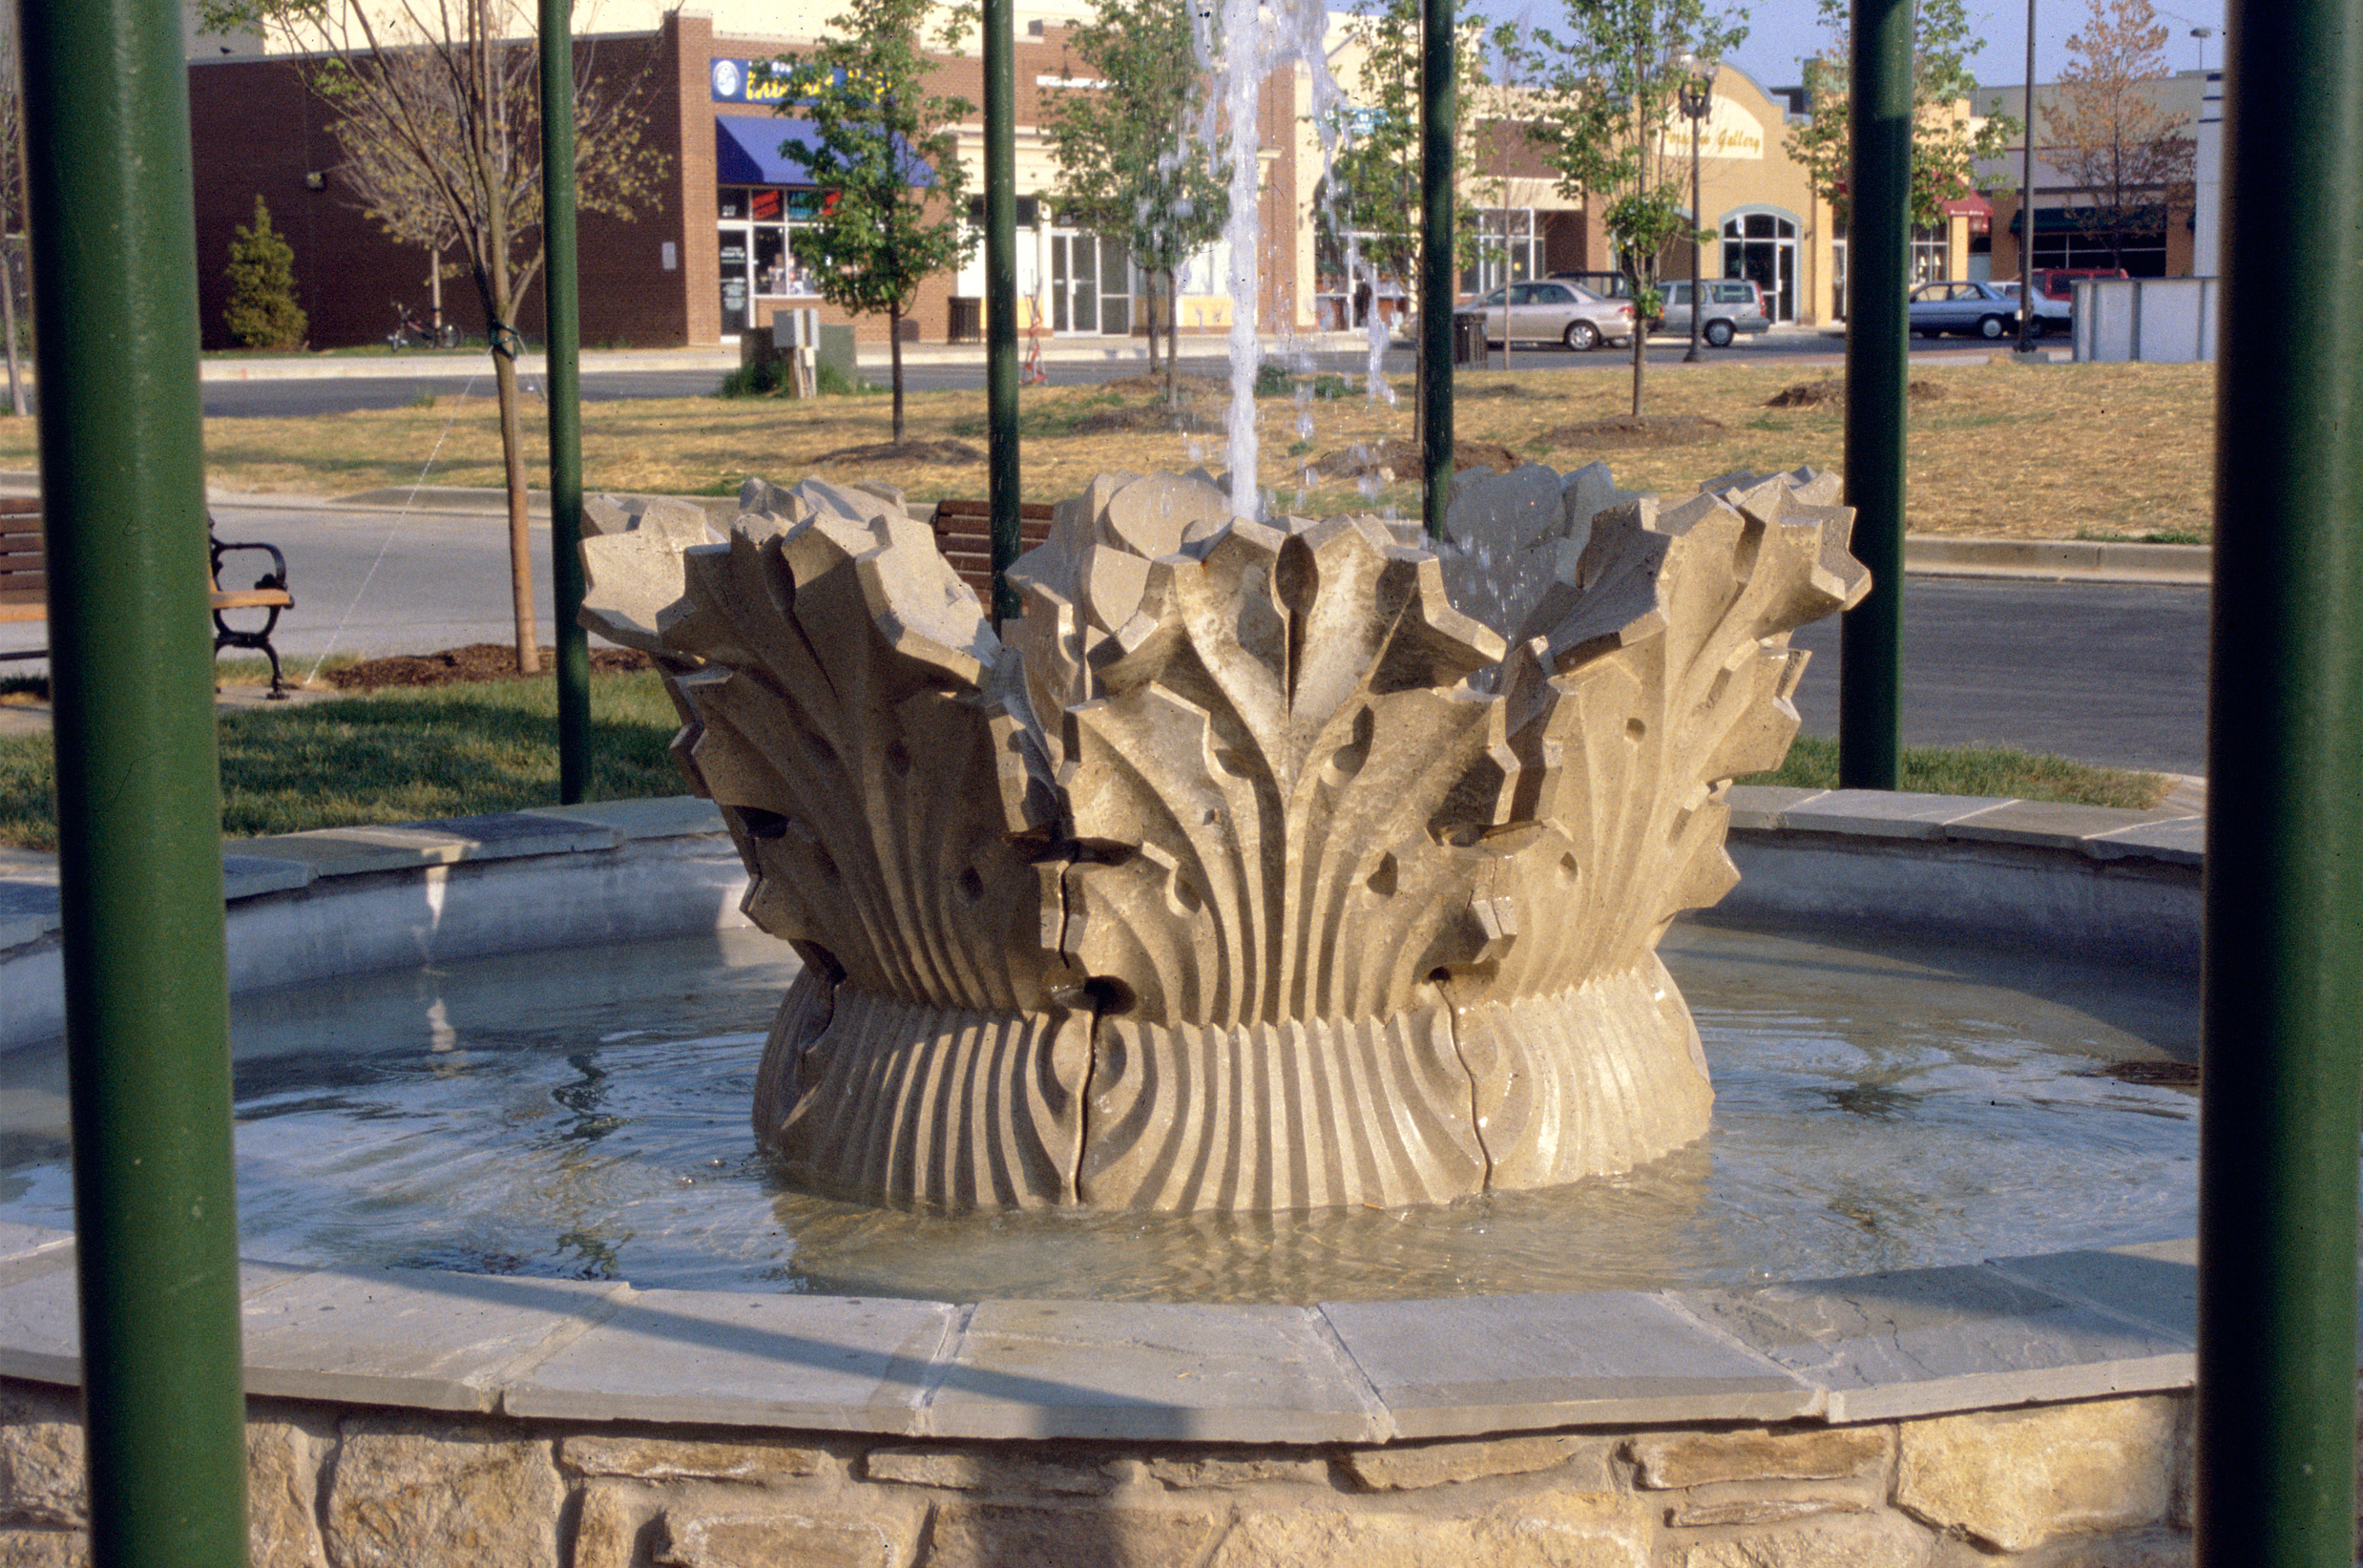 Lakelands Community – Market Square Peristyle, Frieze, and Fountain